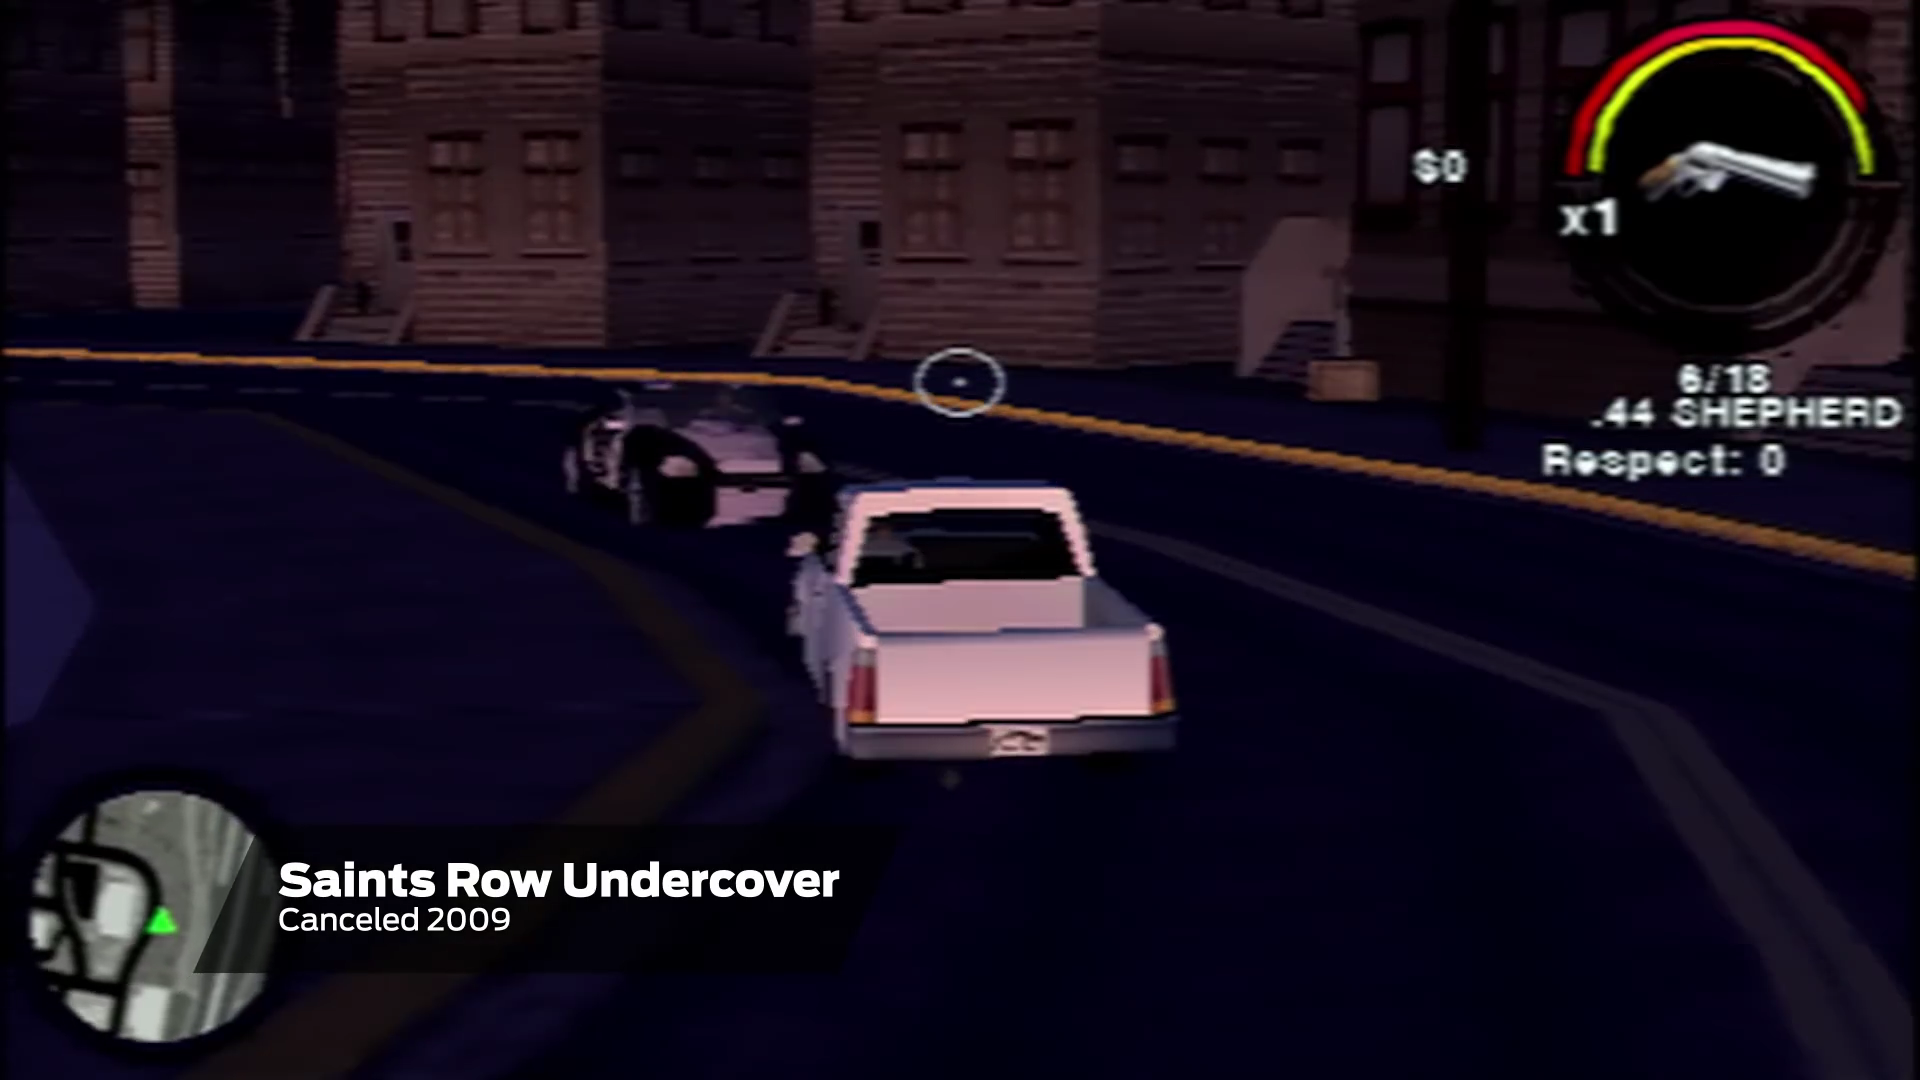 Saints Row: Undercover is the PSP spin-off we never got to play